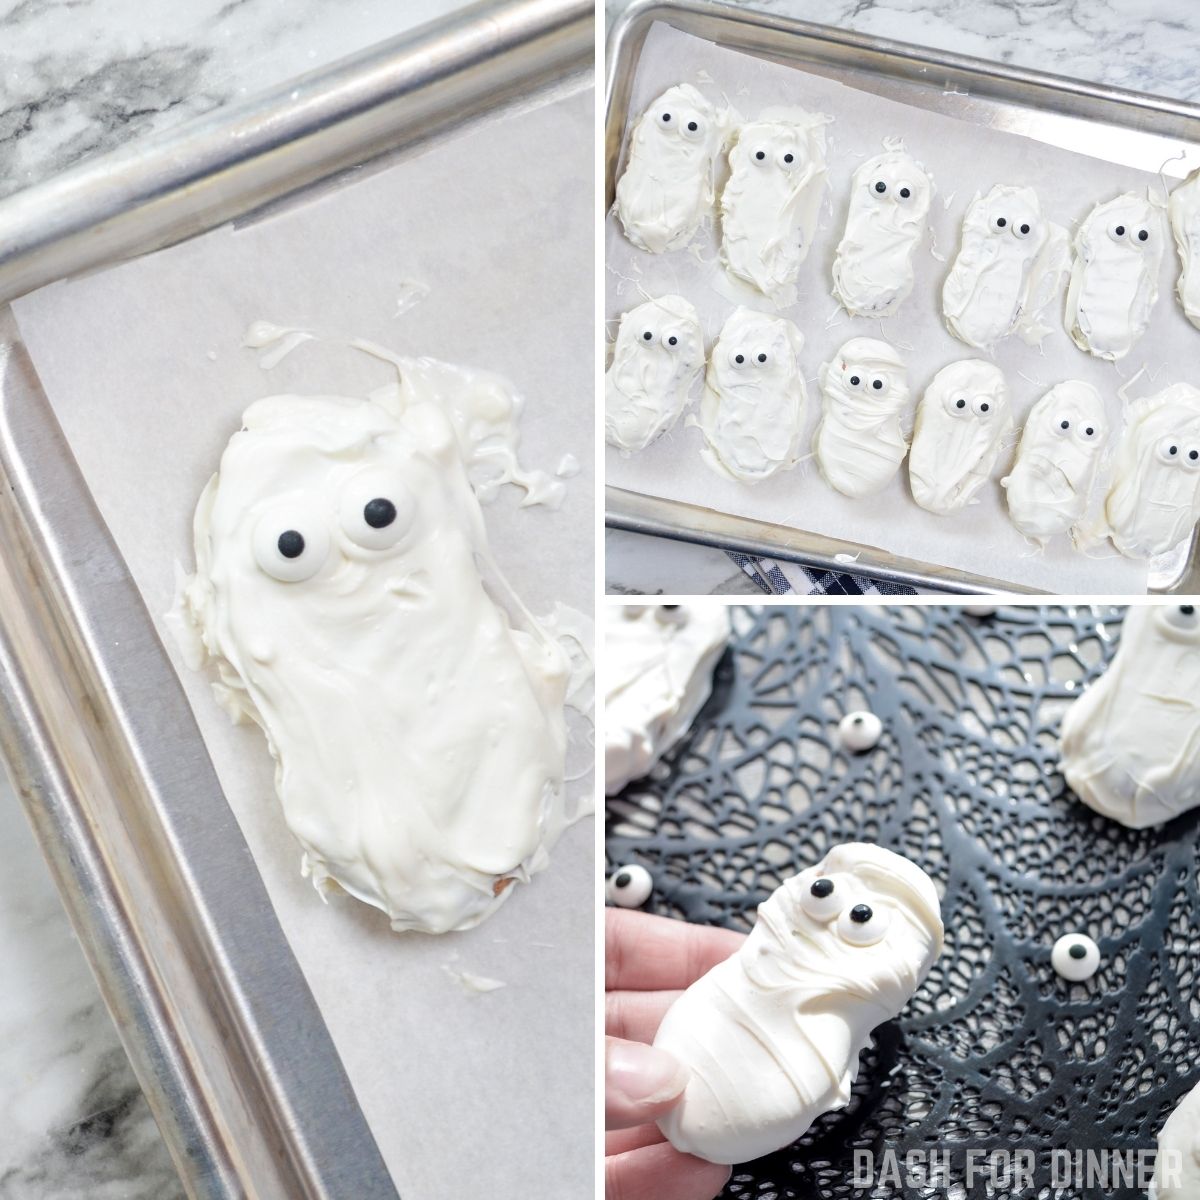 How to coat nutter butters in candy coating to make ghosts.